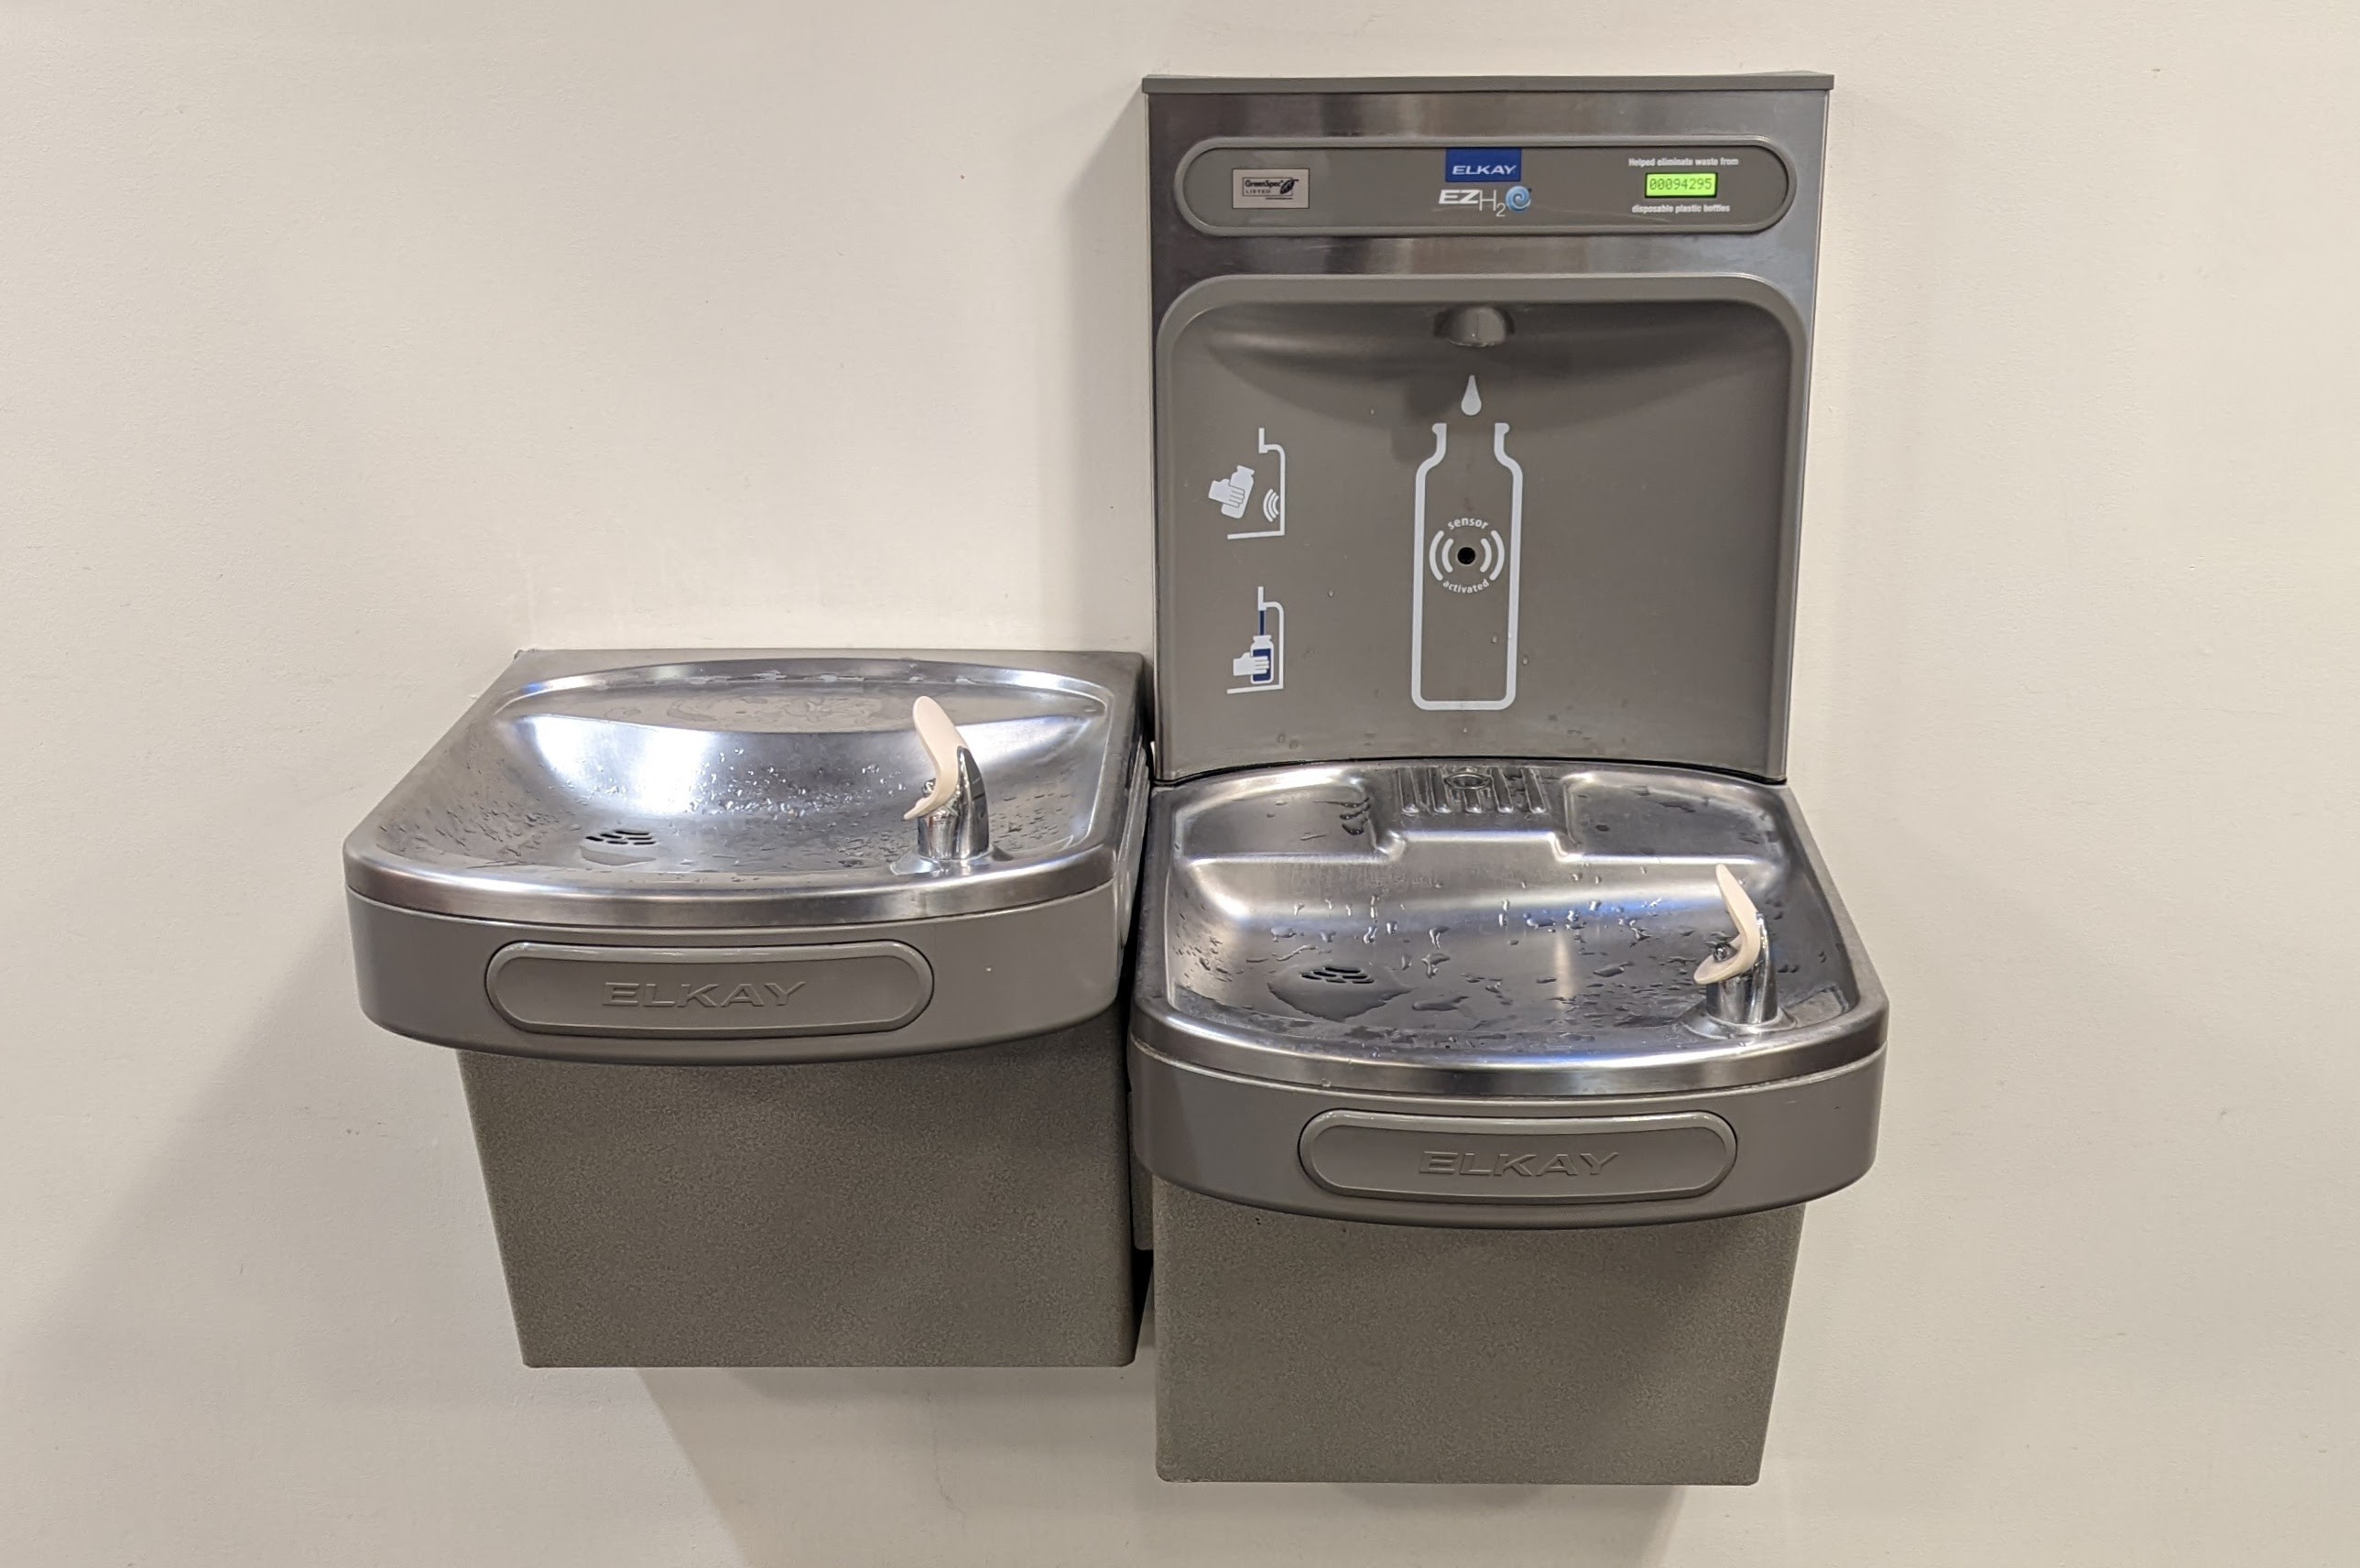 Elkay waterfountain with beautiful lines, amazing water flow, hi-tech water-bottle counter (note this particular unit has saved 94,295 water bottles), and more!